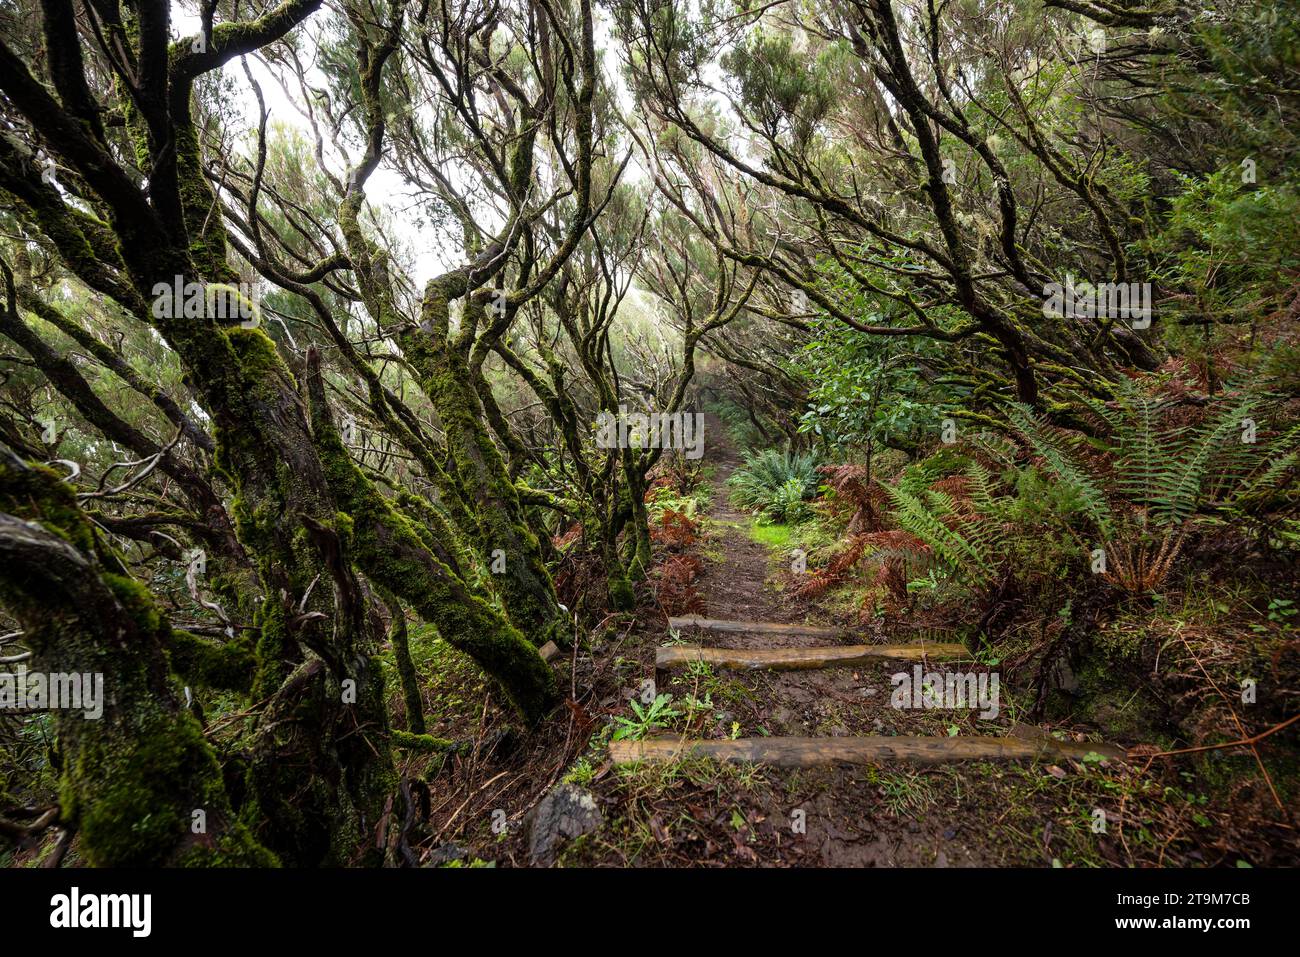 Footpath through a misty forest of moss-covered tree heath, path section of the 'Levada do Furado Velho' hiking trail, Madeira, Portugal Stock Photo